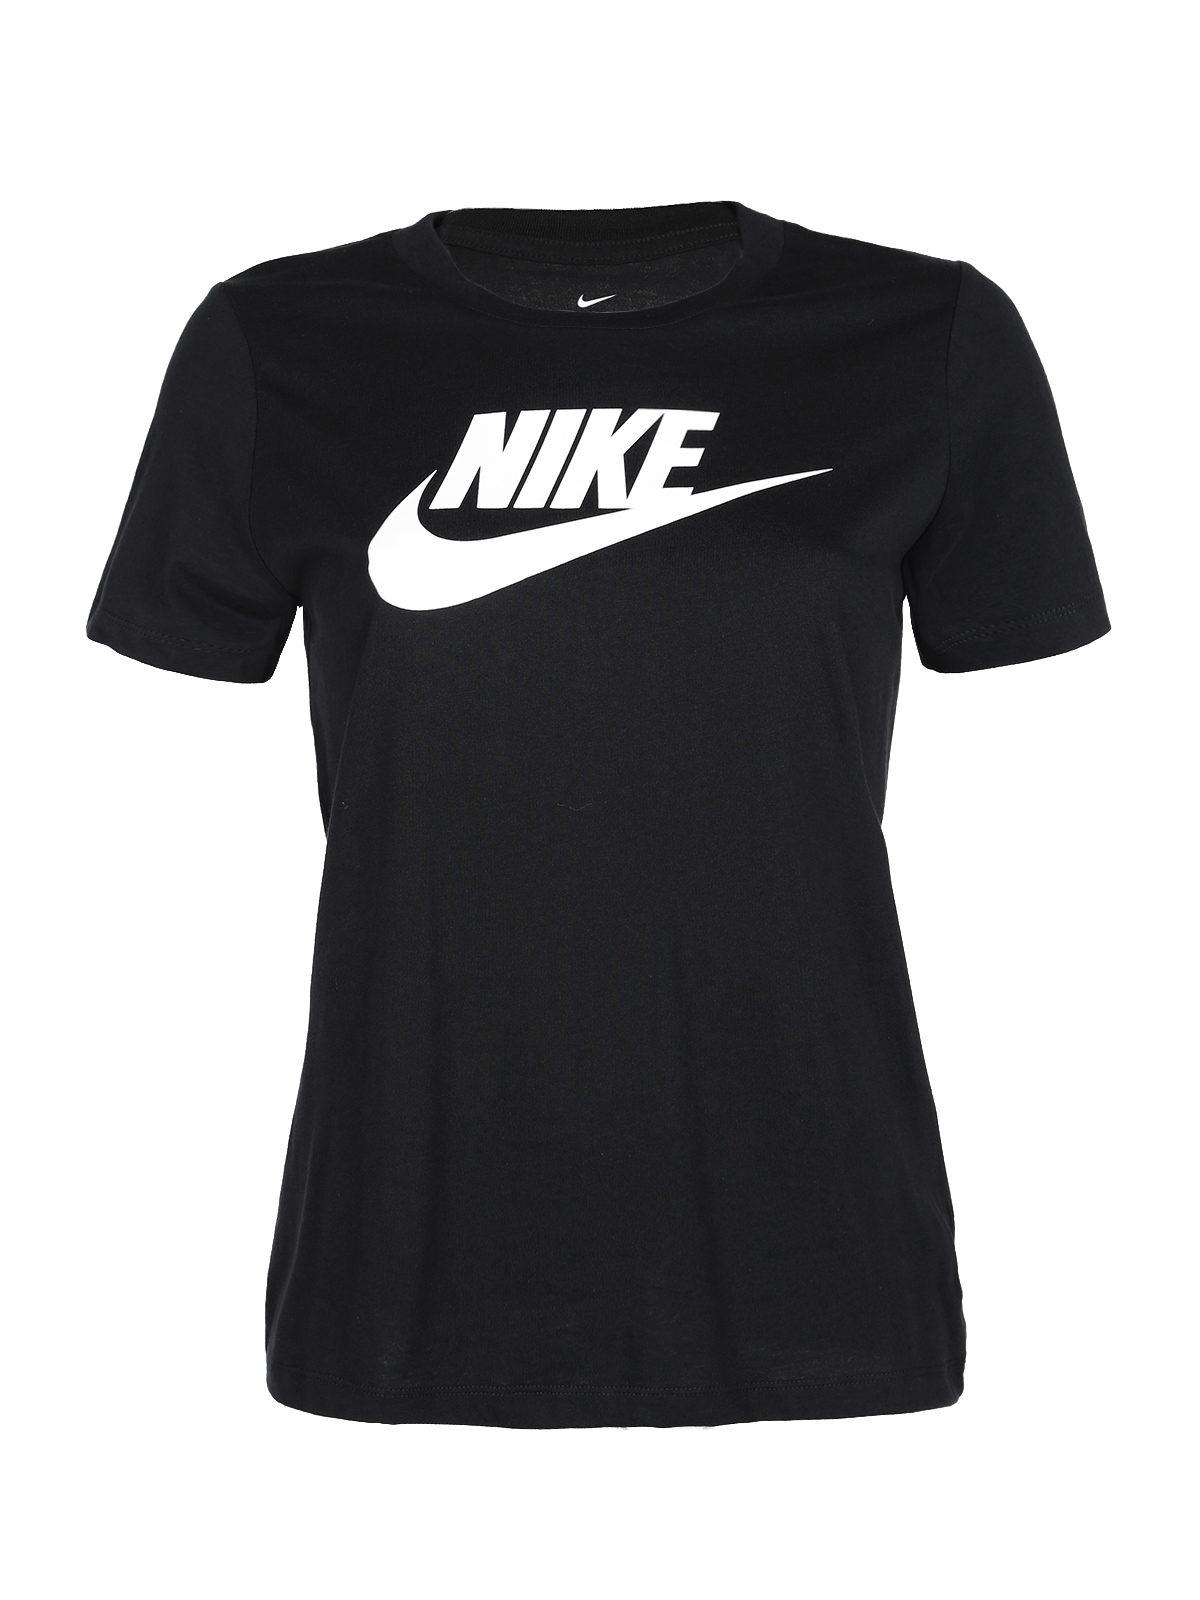 Nike Bv6169-010 woman round neck t-shirt: T-Shirt and Top